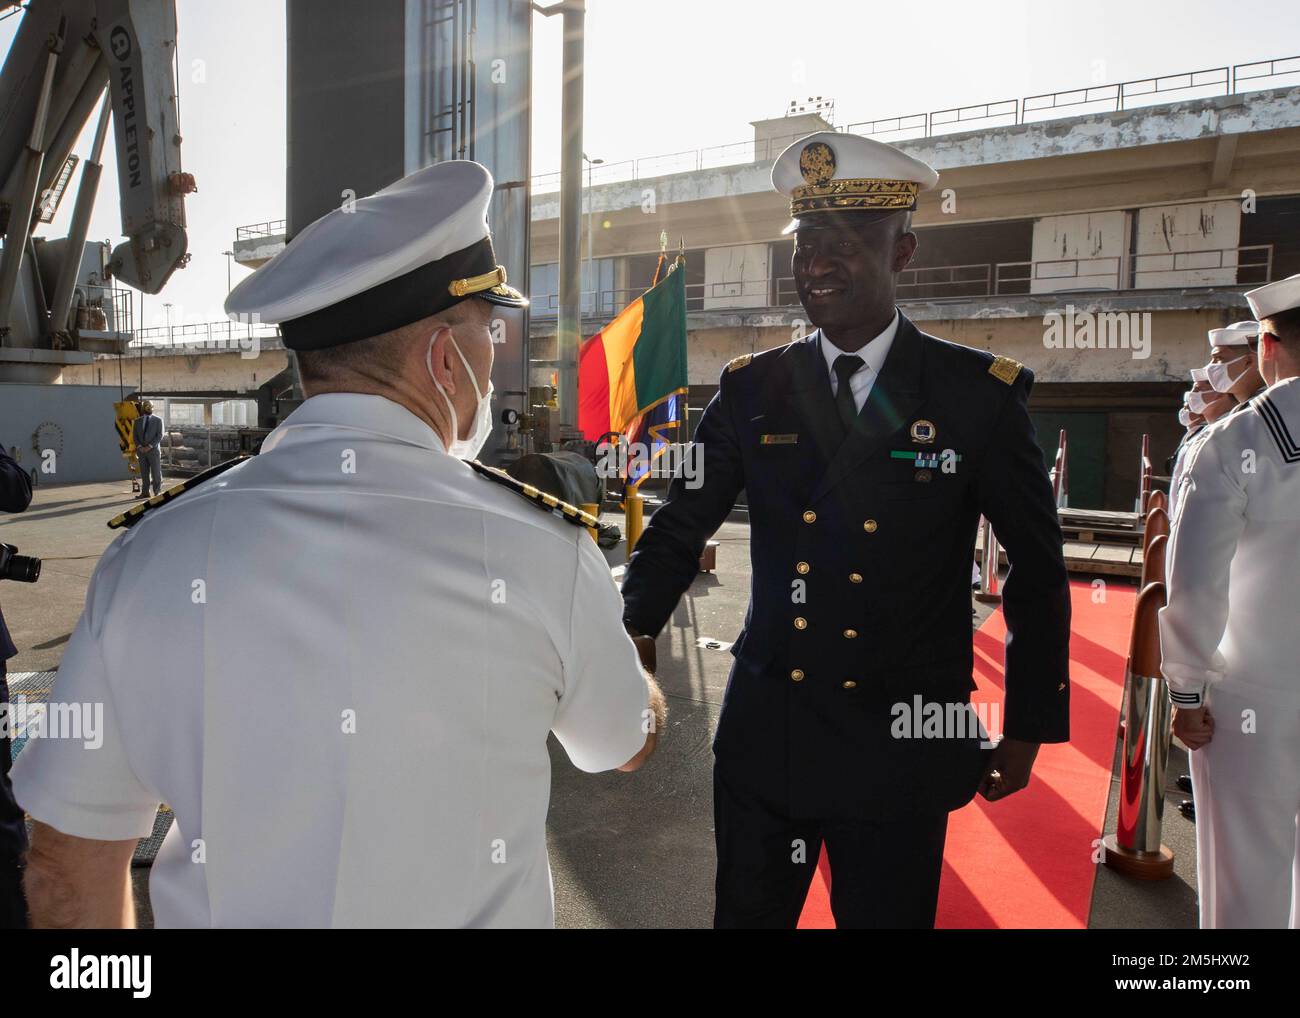 210318-N-TI693-1213    DAKAR, Senegal (March 18, 2022) The Republic of Senegal's Chief of National Navy Staff, Rear Adm. Oumar Wade, is welcomed aboard the Expeditionary Sea Base USS Hershel 'Woody' Williams (ESB 4) by Capt. Michael Concannon, commanding officer of Hershel 'Woody' Williams, for a reception following the closing ceremonies of Exercise Obangame Express 2022, March 18, 2022. Obangame Express 2022, conducted by U.S. Naval Forces Africa, is an at-sea maritime exercise designed to improve cooperation among participating nations in order to increase maritime safety and security in th Stock Photo